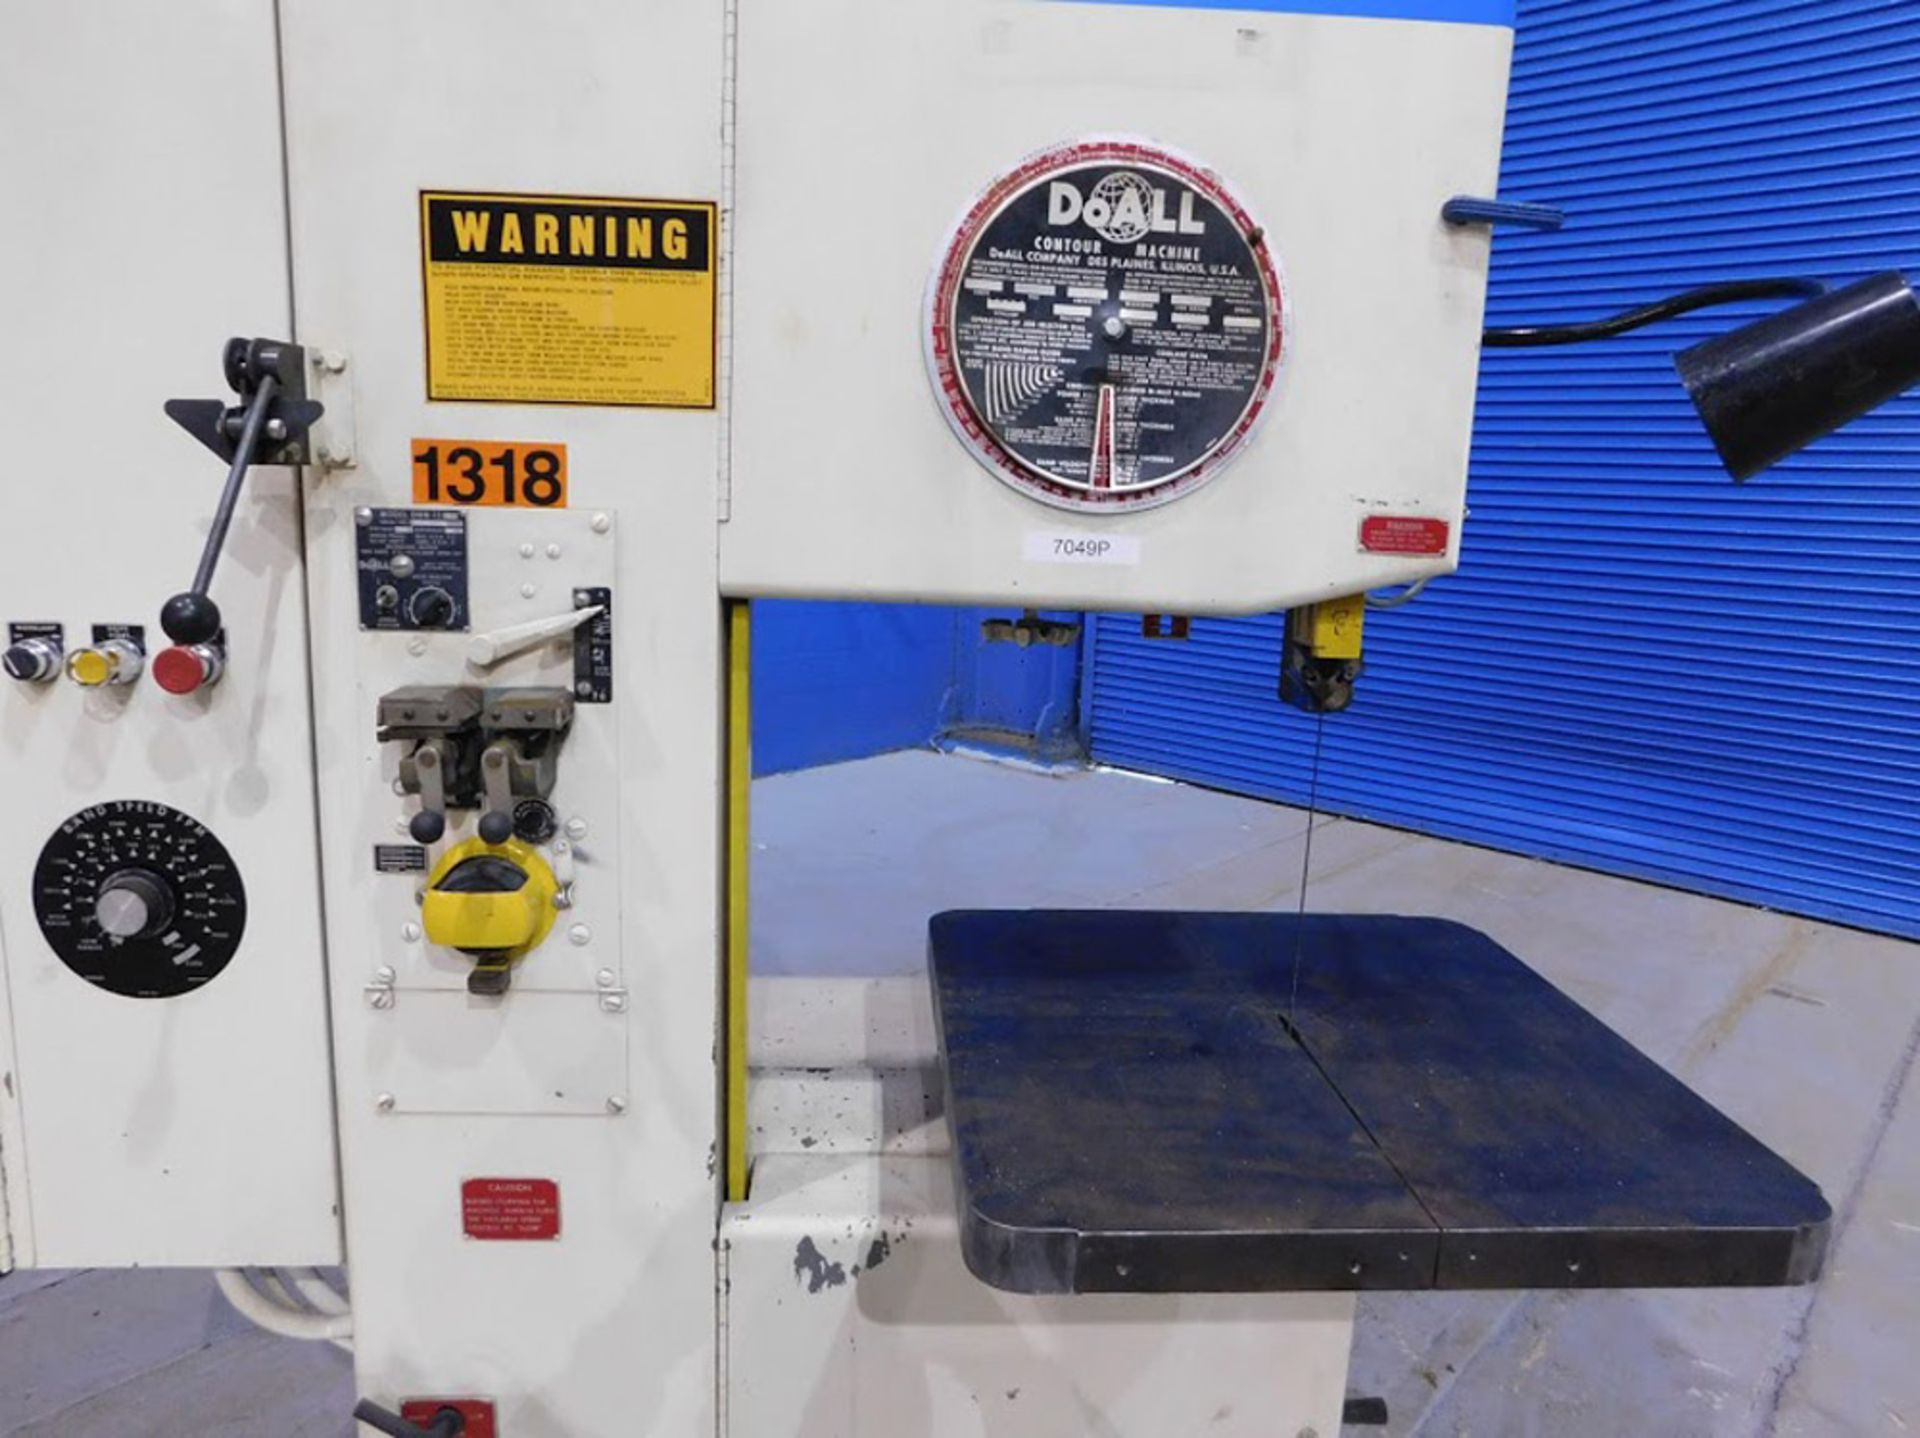 FREE LOADING - Located In: Painesville, OH - 1980 Doall Vertical Bandsaw, 20", Mdl: 2013- 20, S/N: - Image 6 of 8